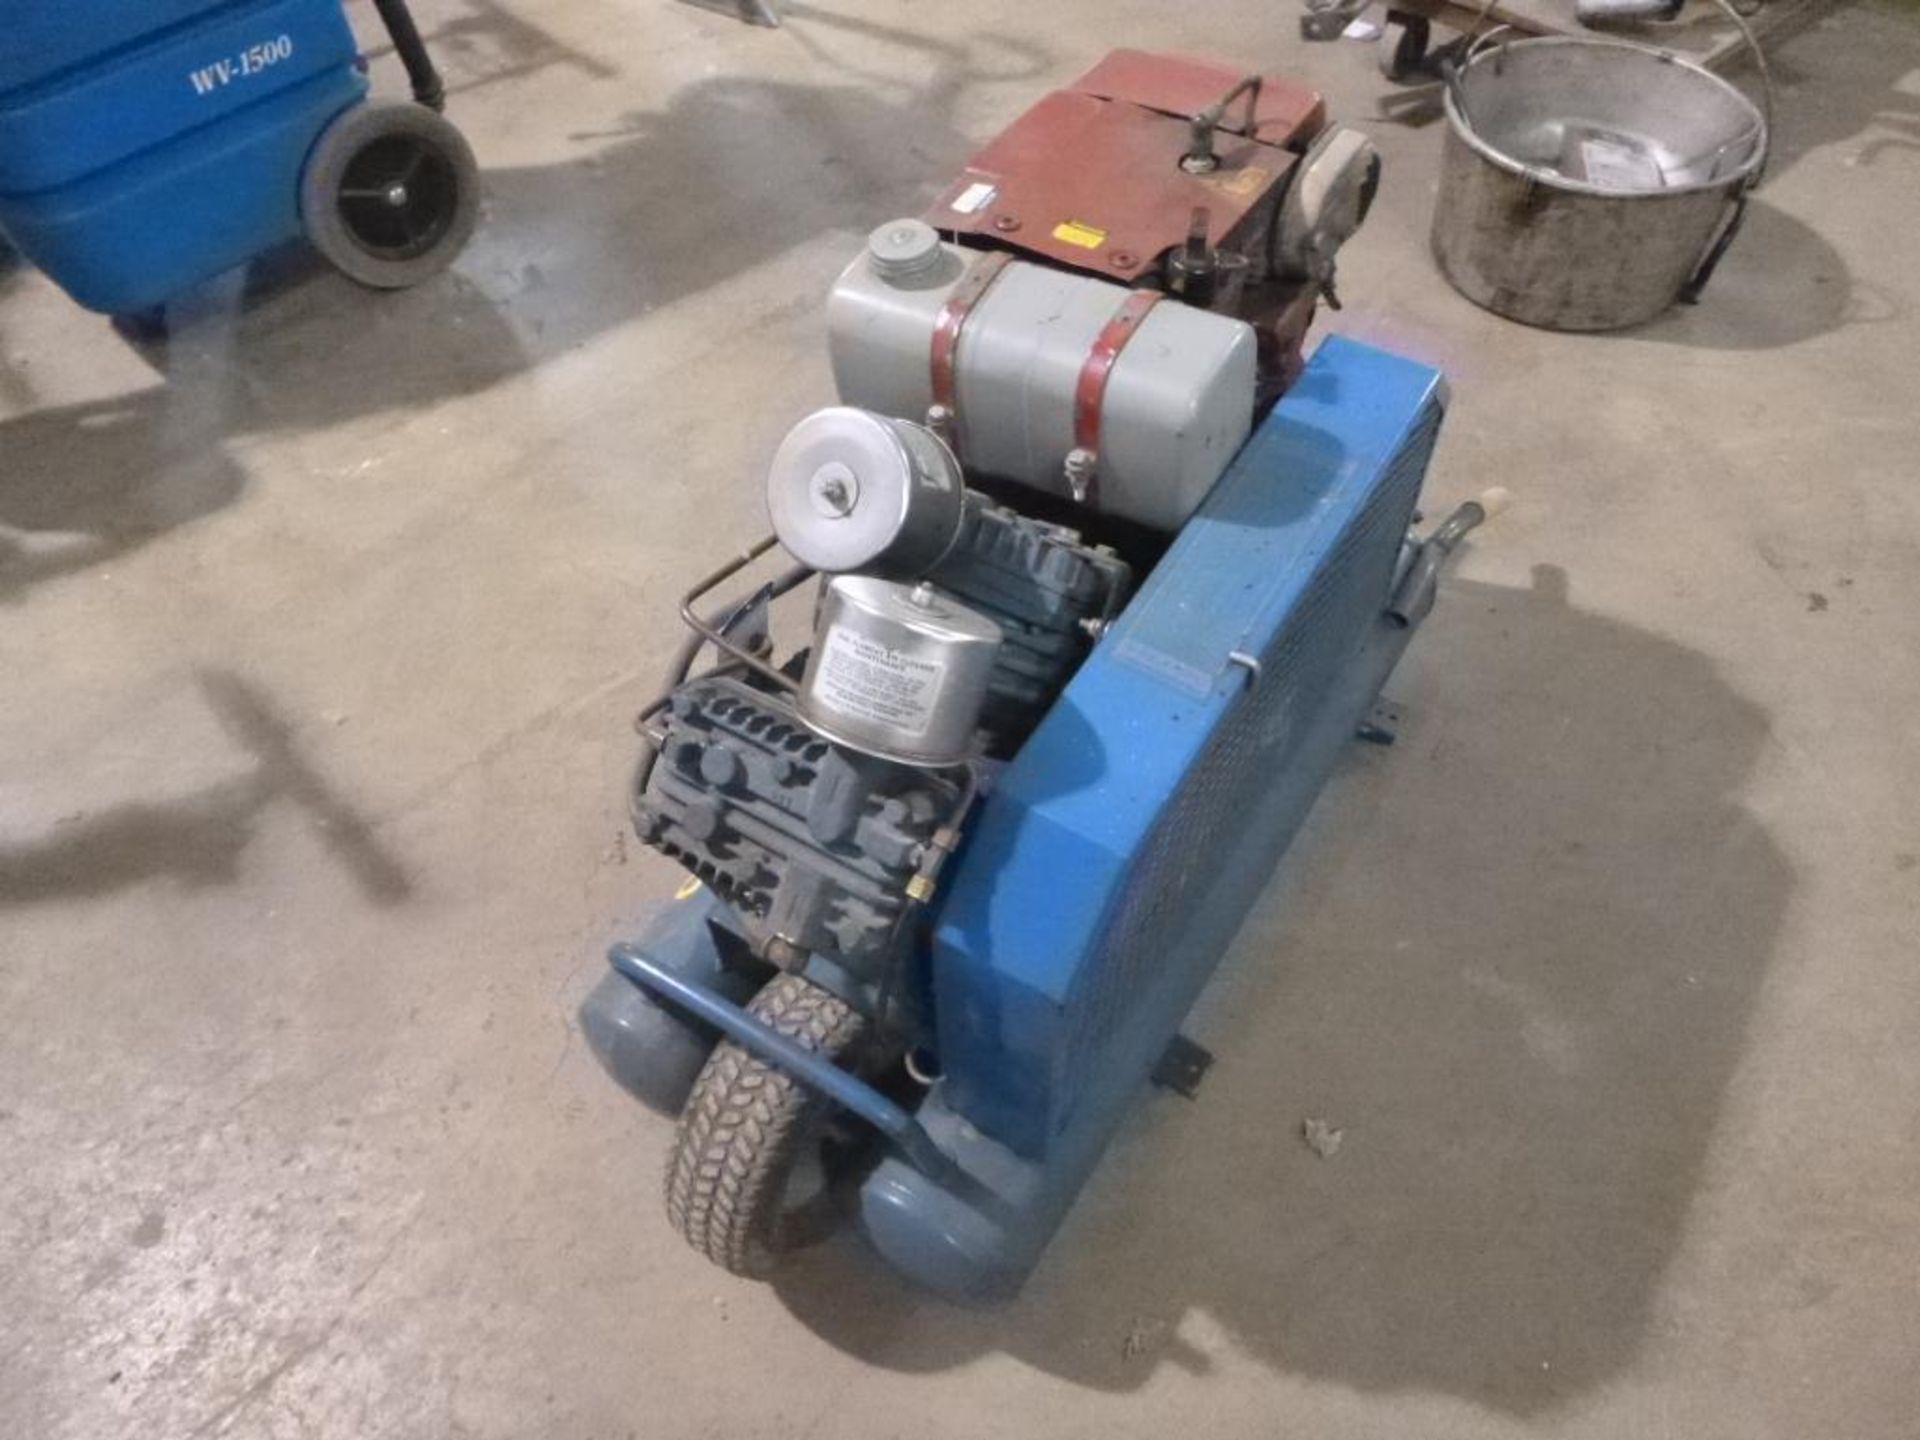 Compressor, Gas 8 HP, Emglo, S/N 62084208, Twin Tank - Image 8 of 10